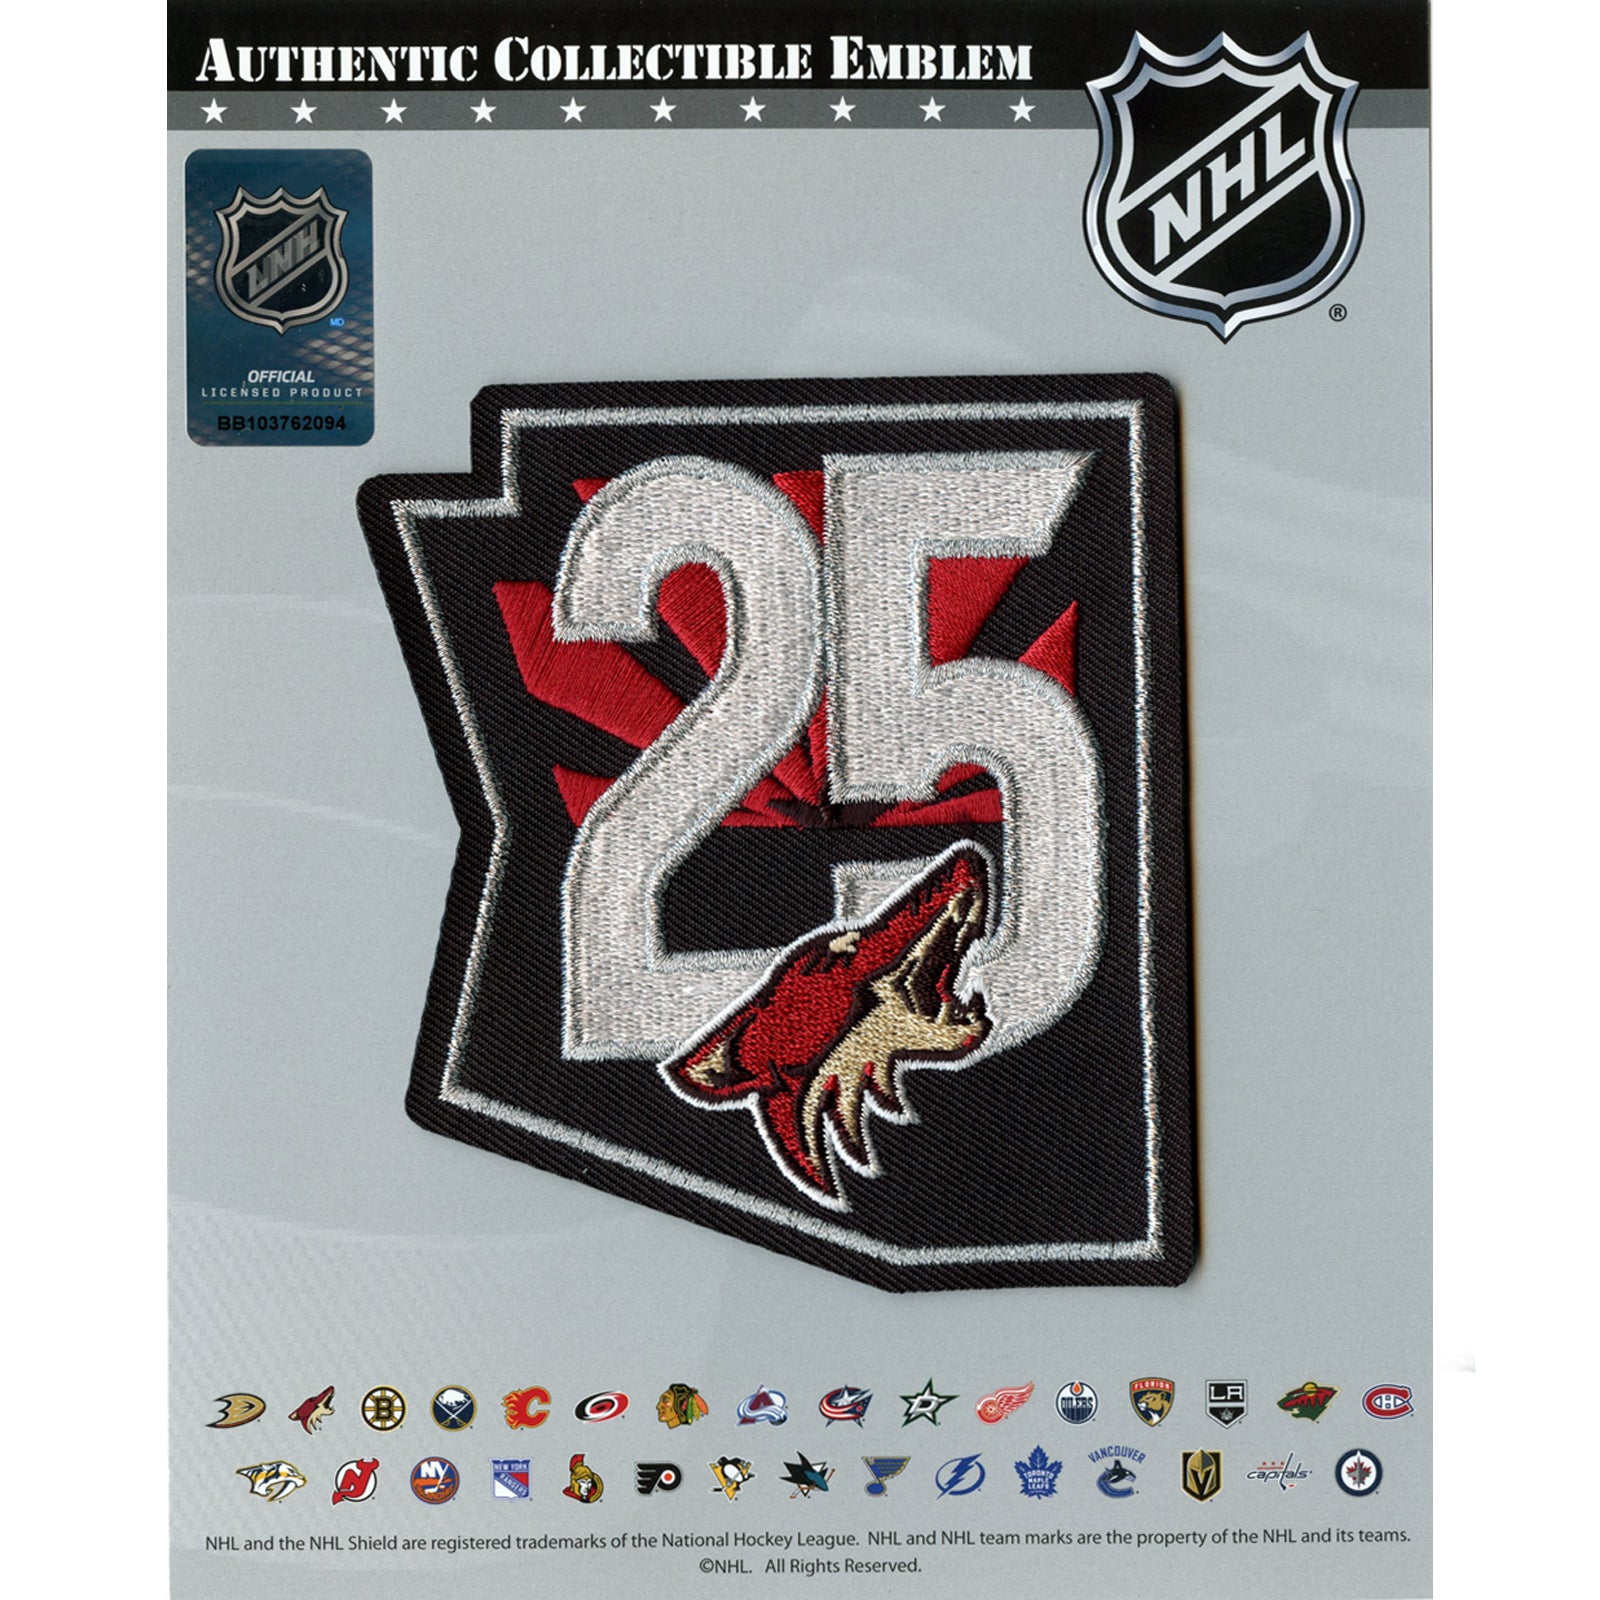 Coyotes celebrate 25th anniversary with jersey patches, center ice